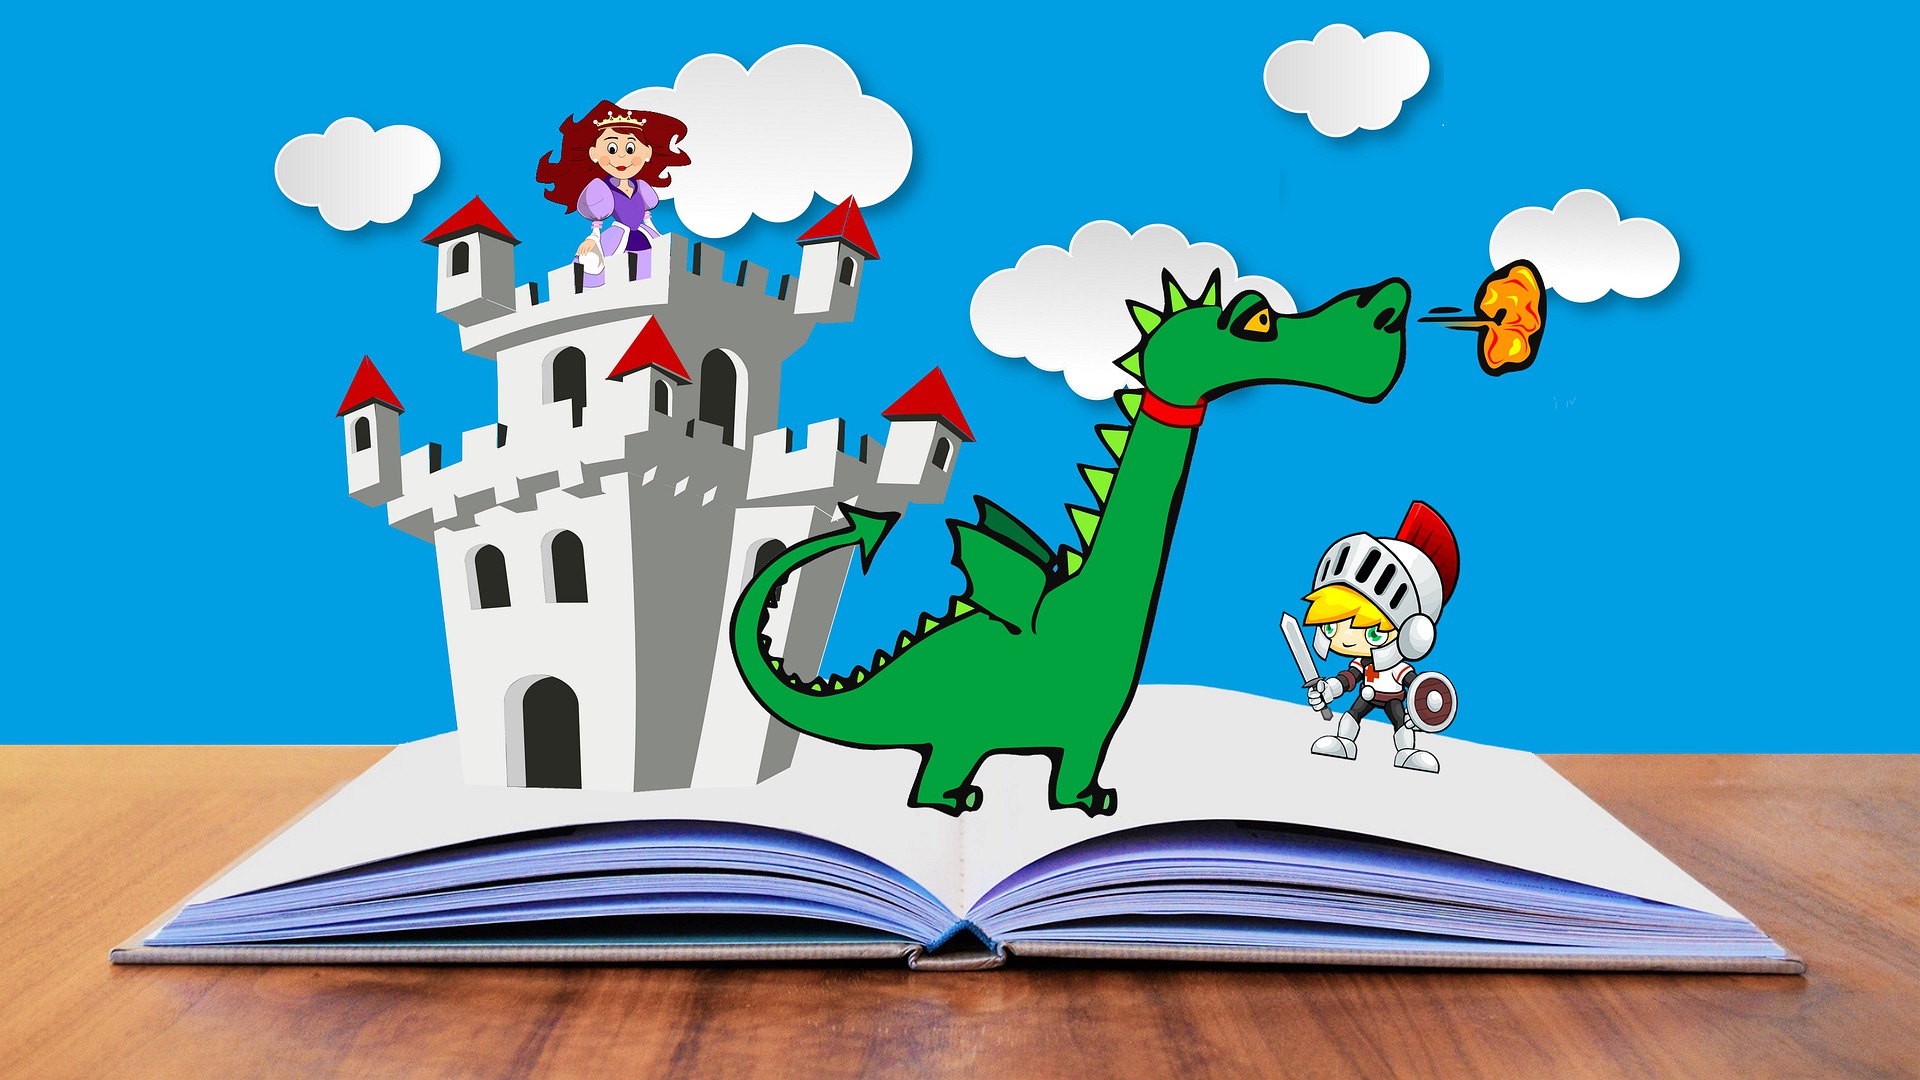 Book laying on table open to the middle. A princess in a castle, a dragon breathing fire, and a knight are all standing on top of the book pages.